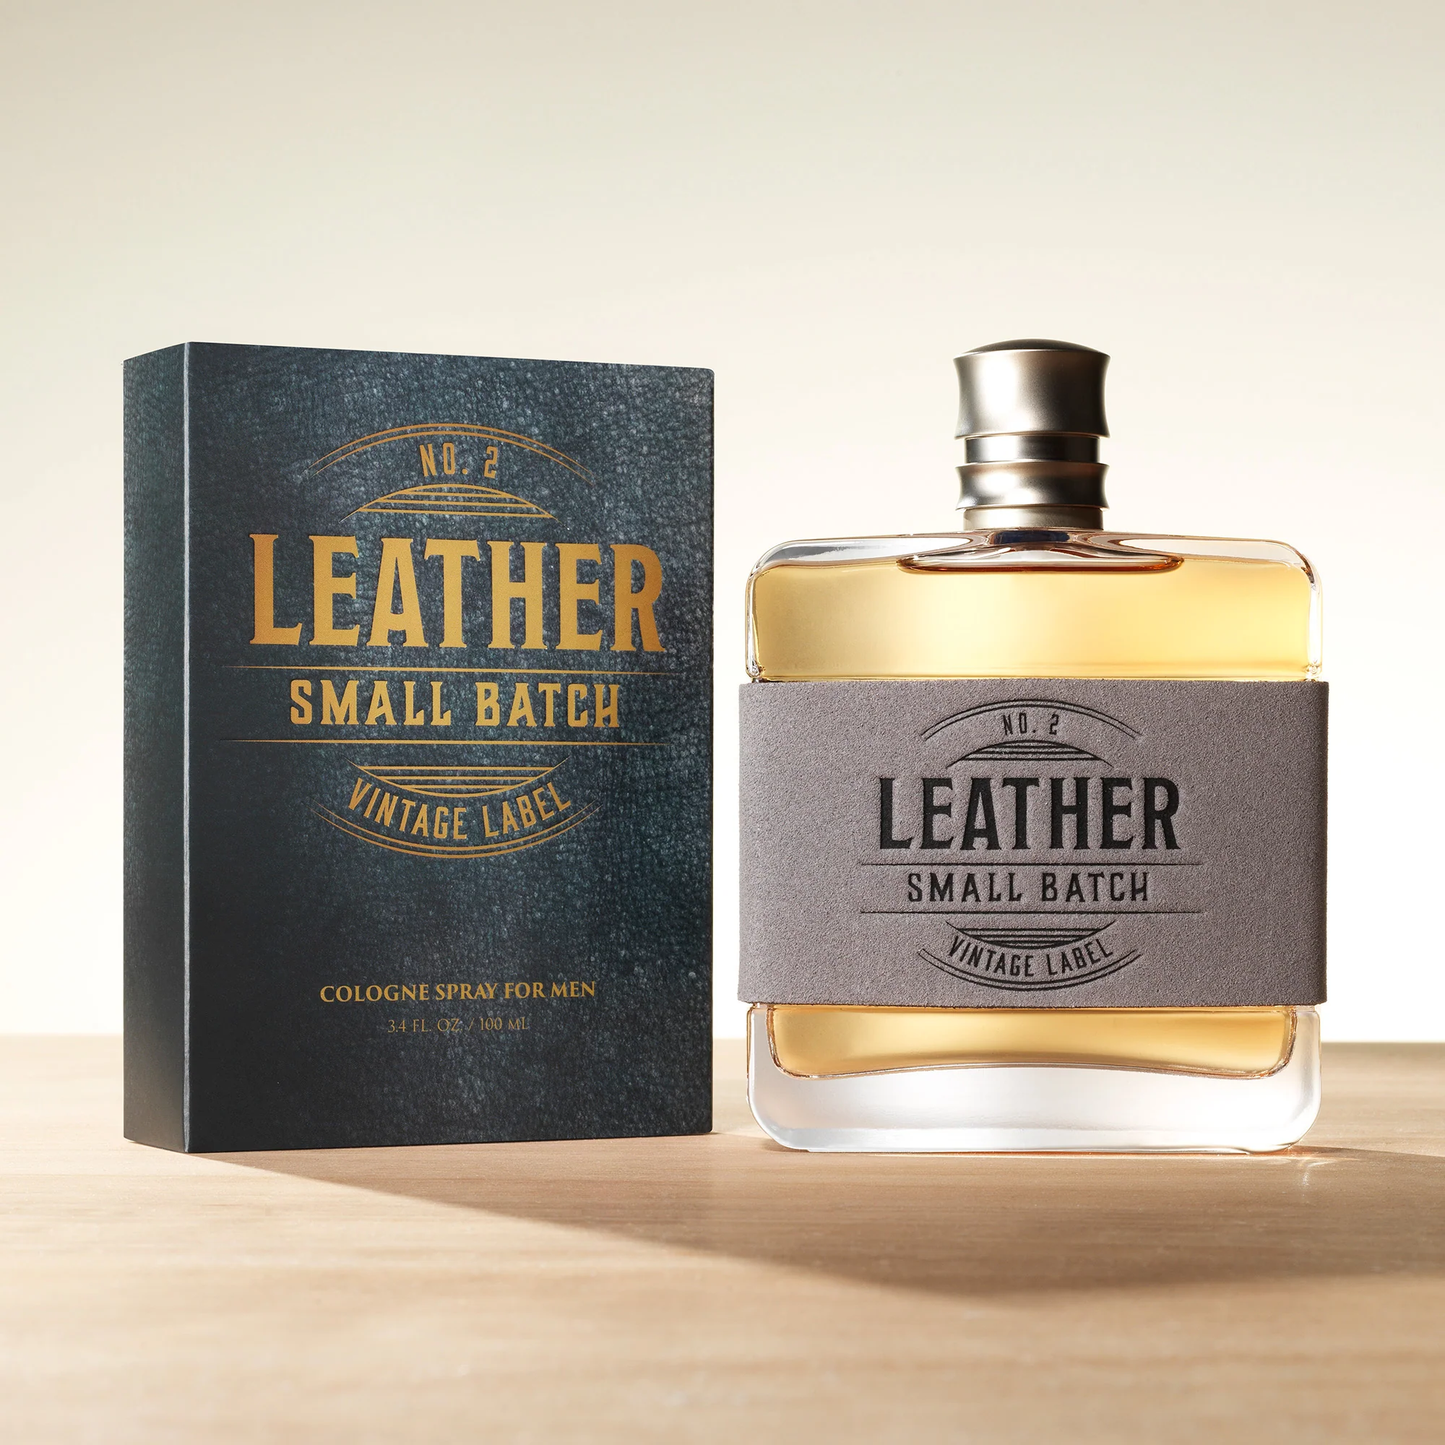 The Leather Small Batch No. 2 Men's Cologne Spray